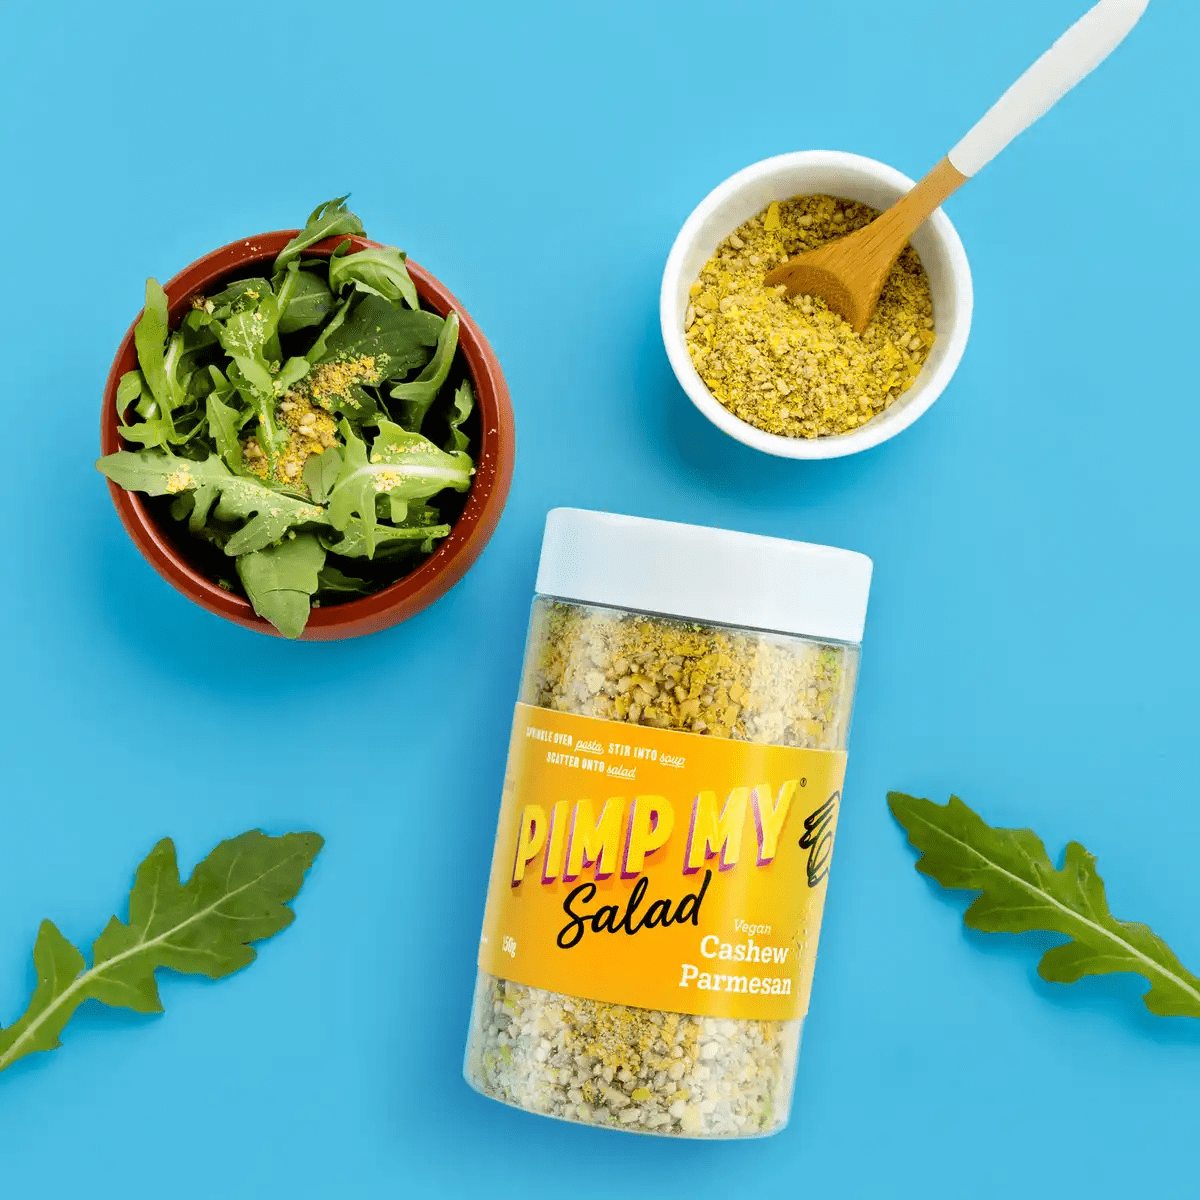 Pimp My Salad is a fun and innovative brand based in Byron Bay.